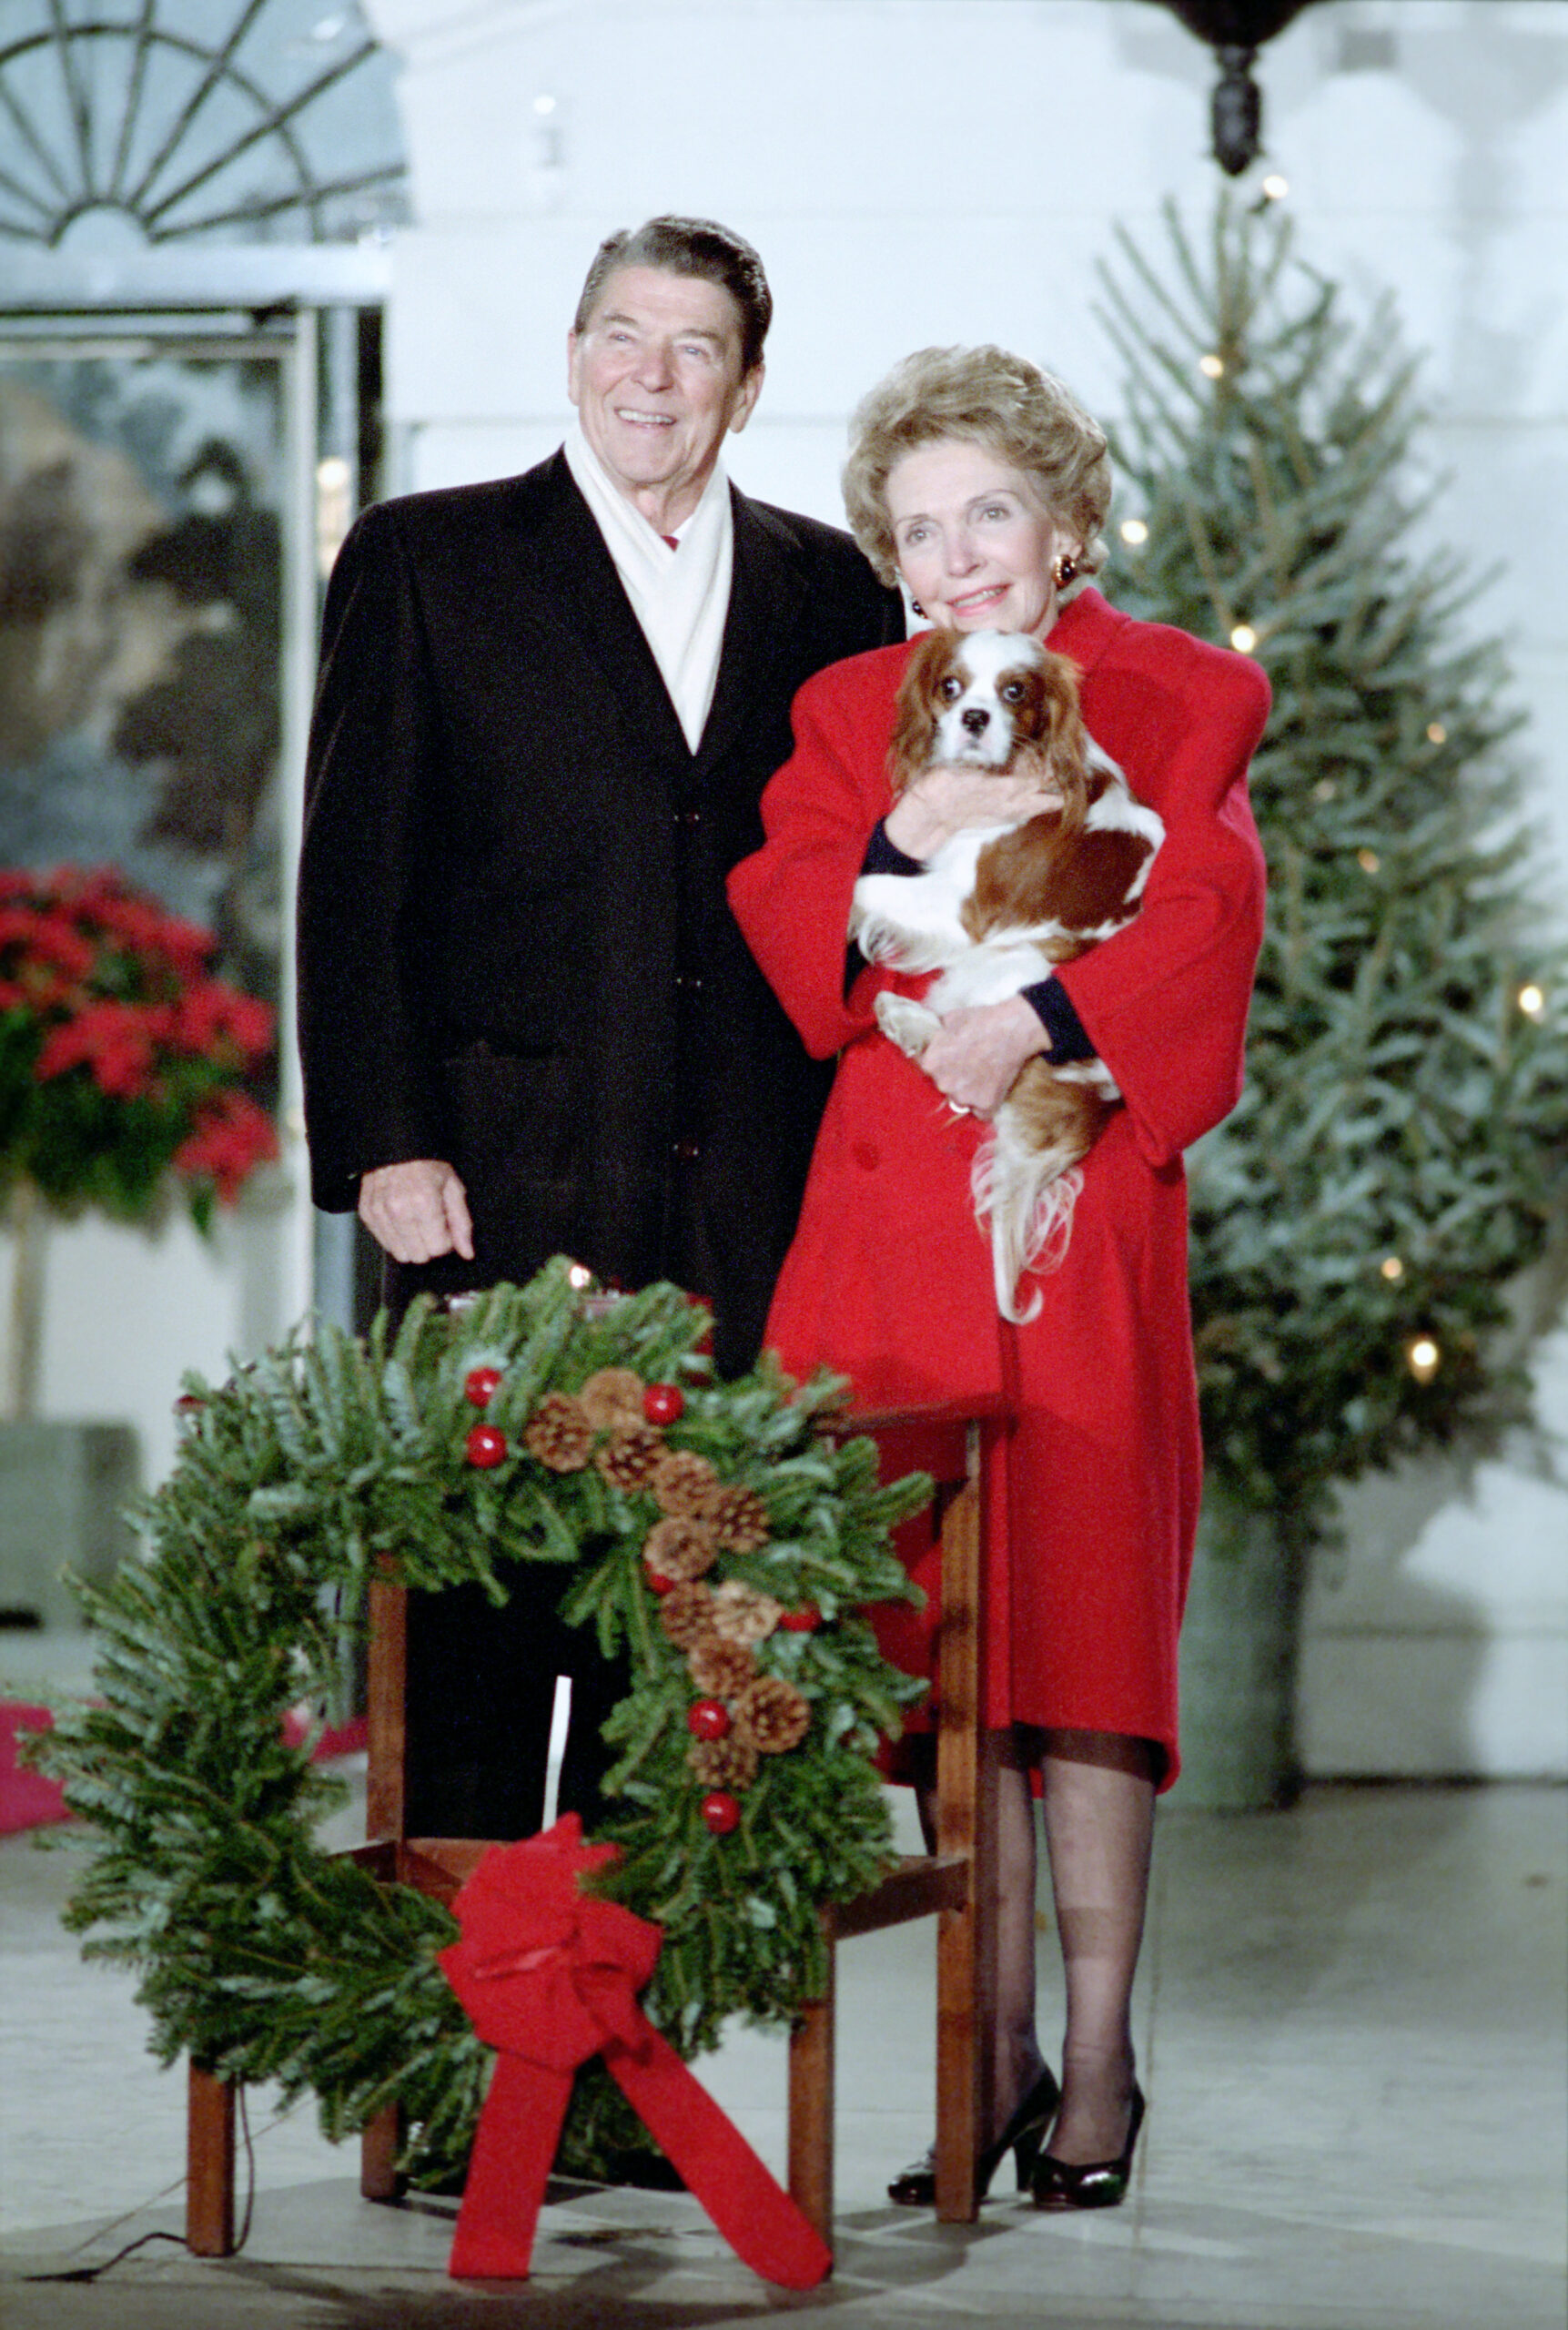 Reagan, Nancy, and Rex at the 1985 tree lighting – National Archives Identifier: 75854519